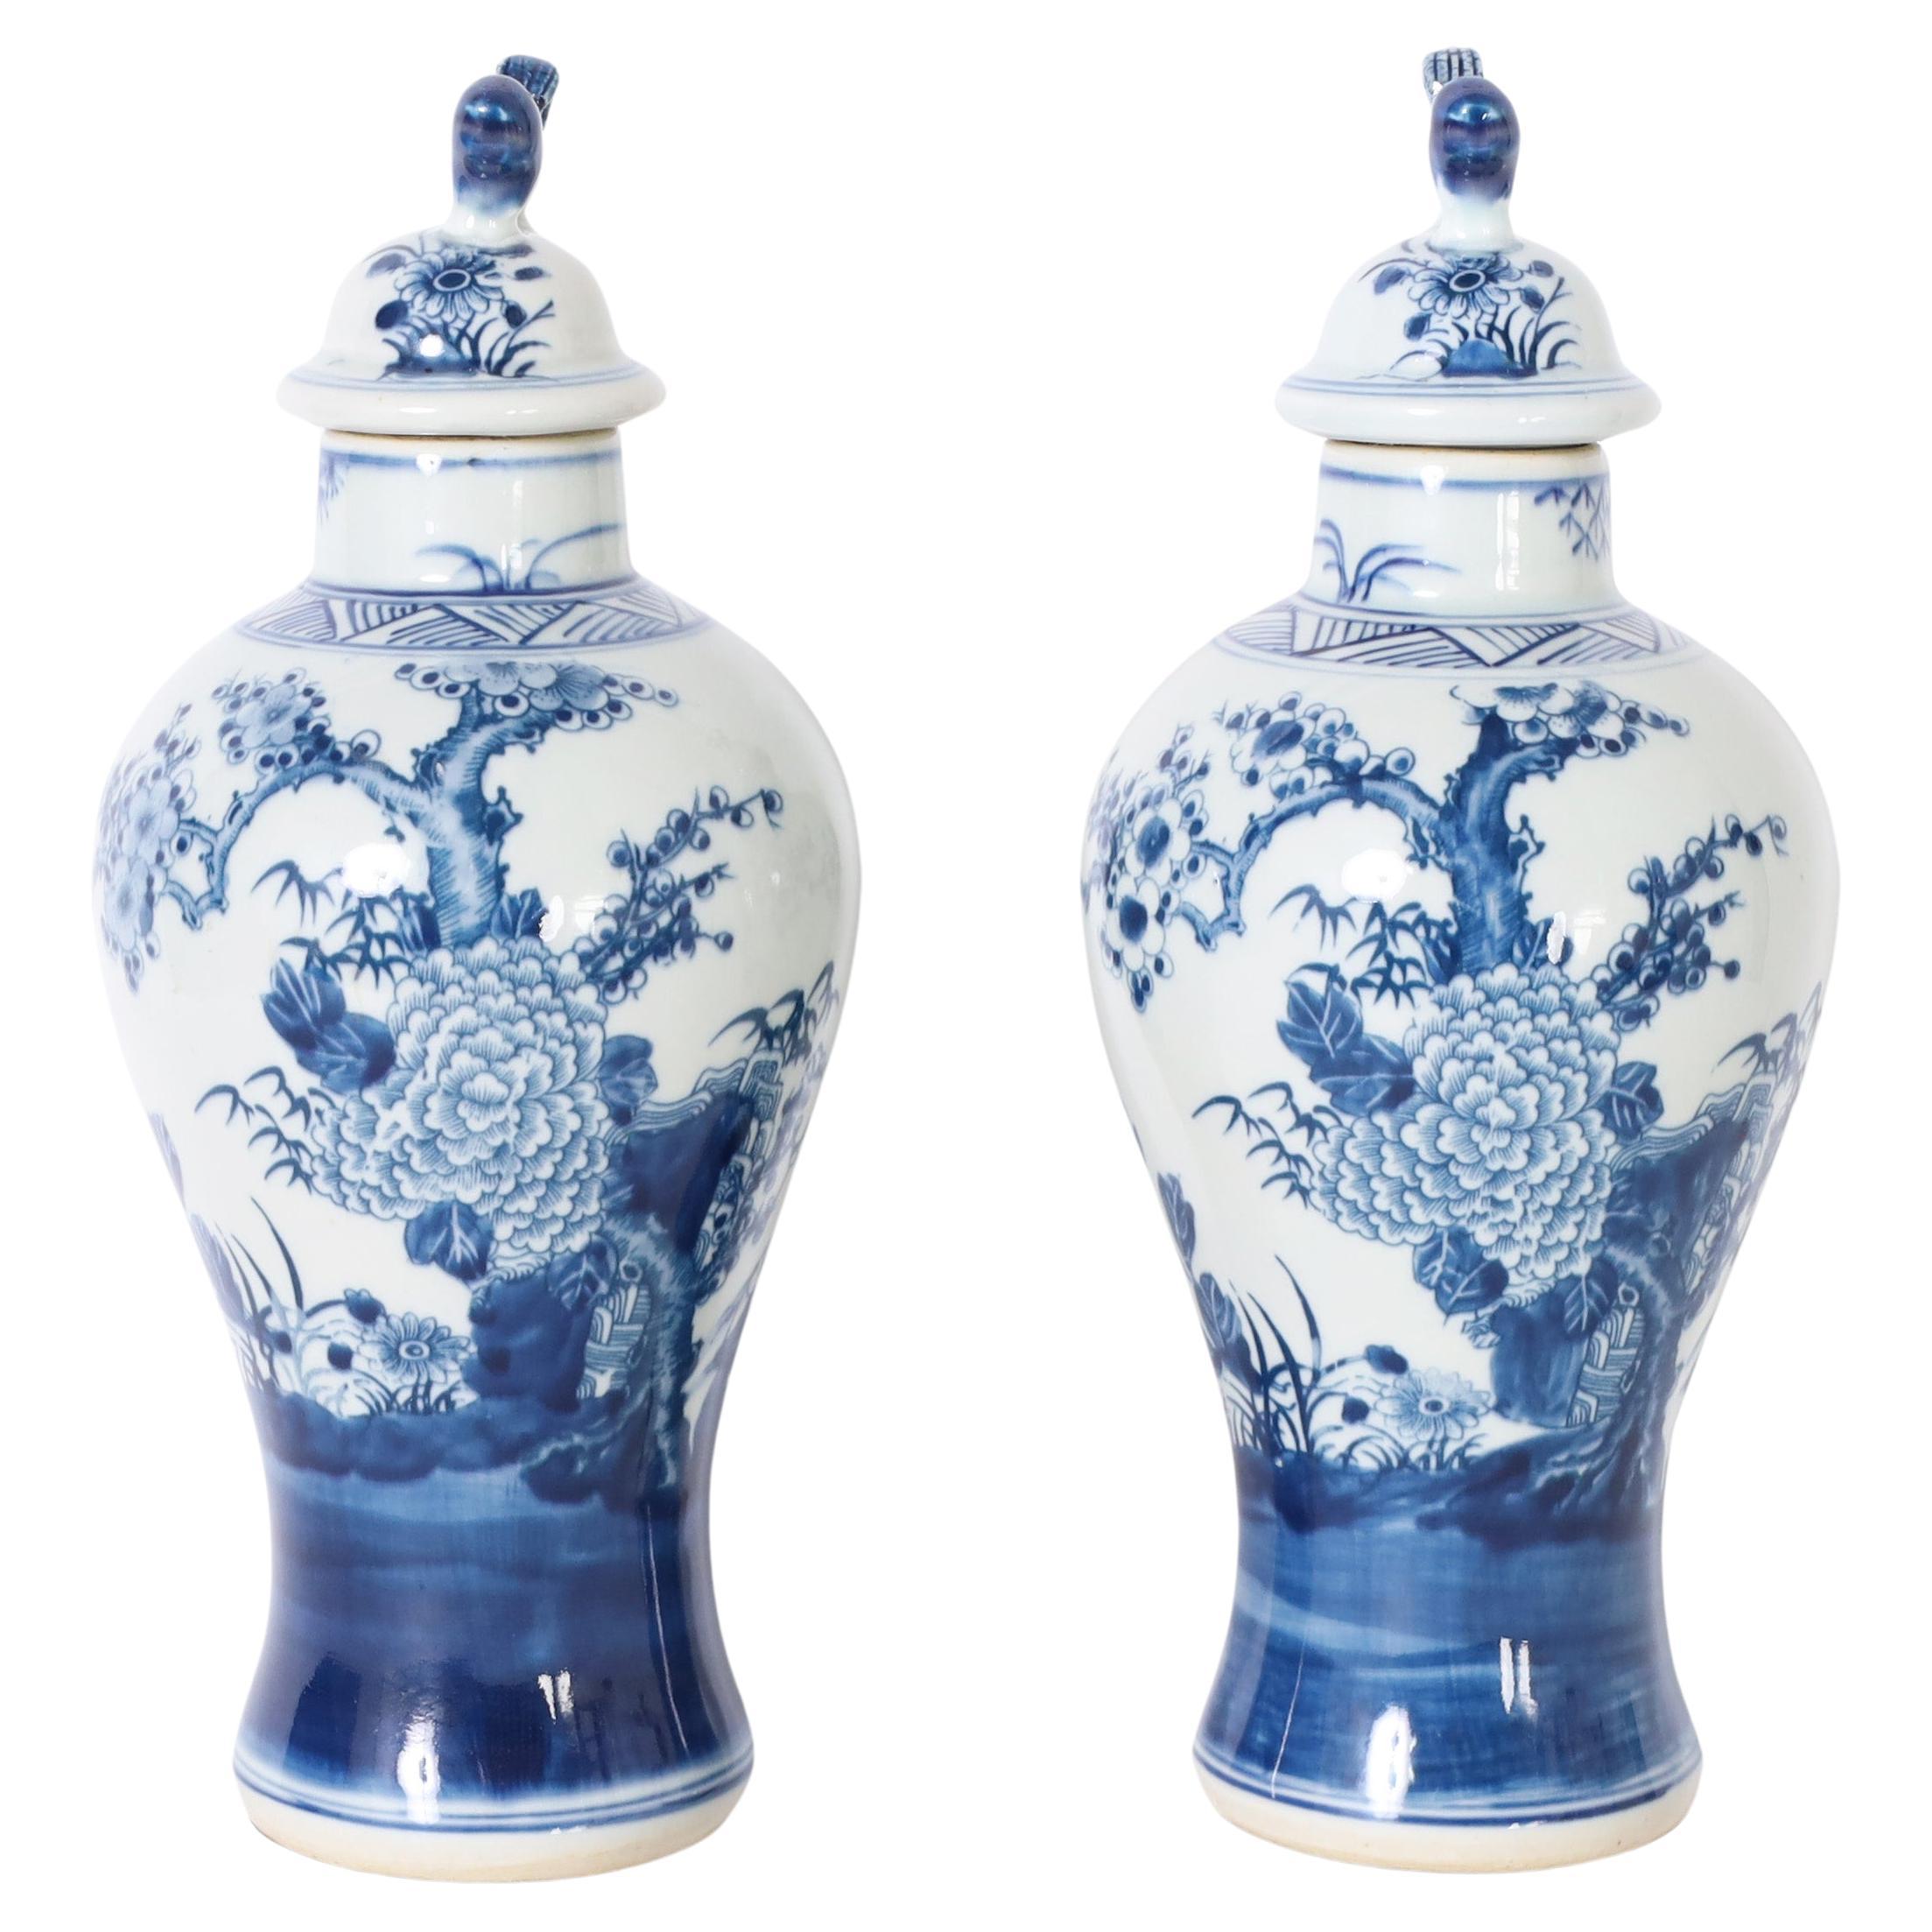 Pair of Blue and White Urns or Jars With Flowers For Sale